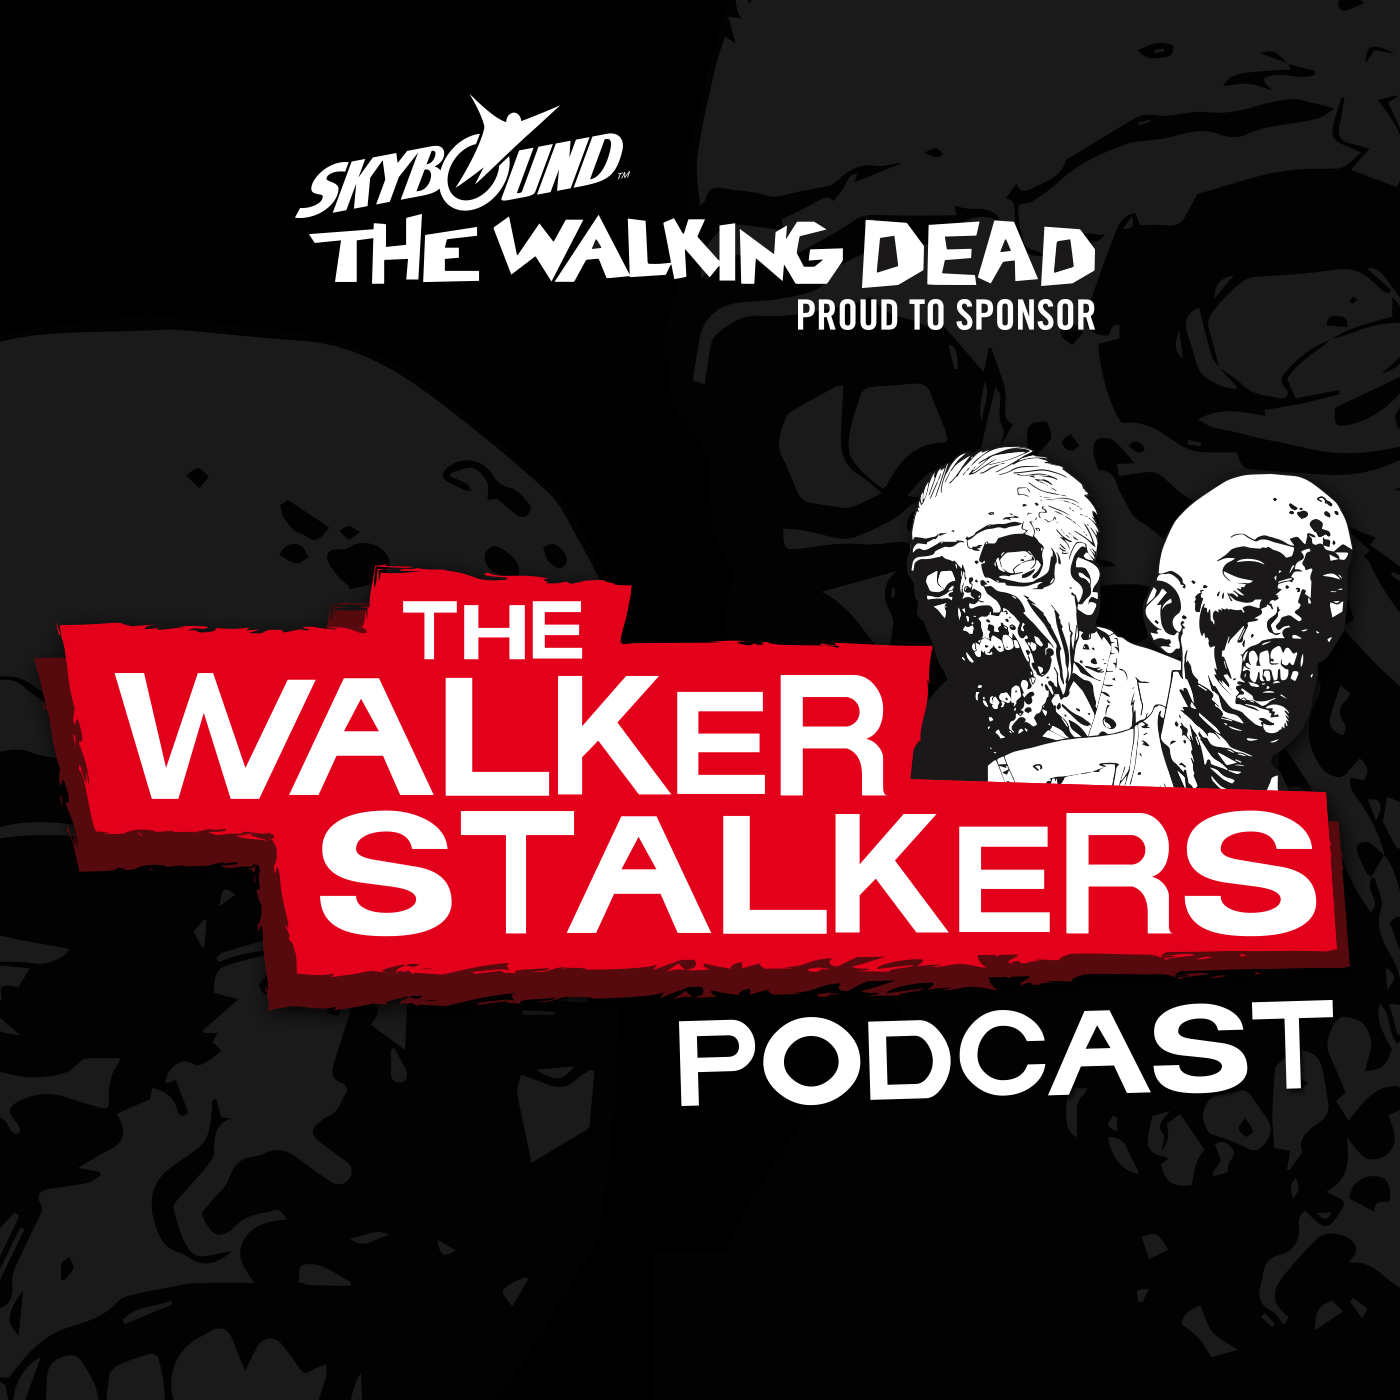 The Walker Stalkers: A Podcast for Fans of The Walking Dead